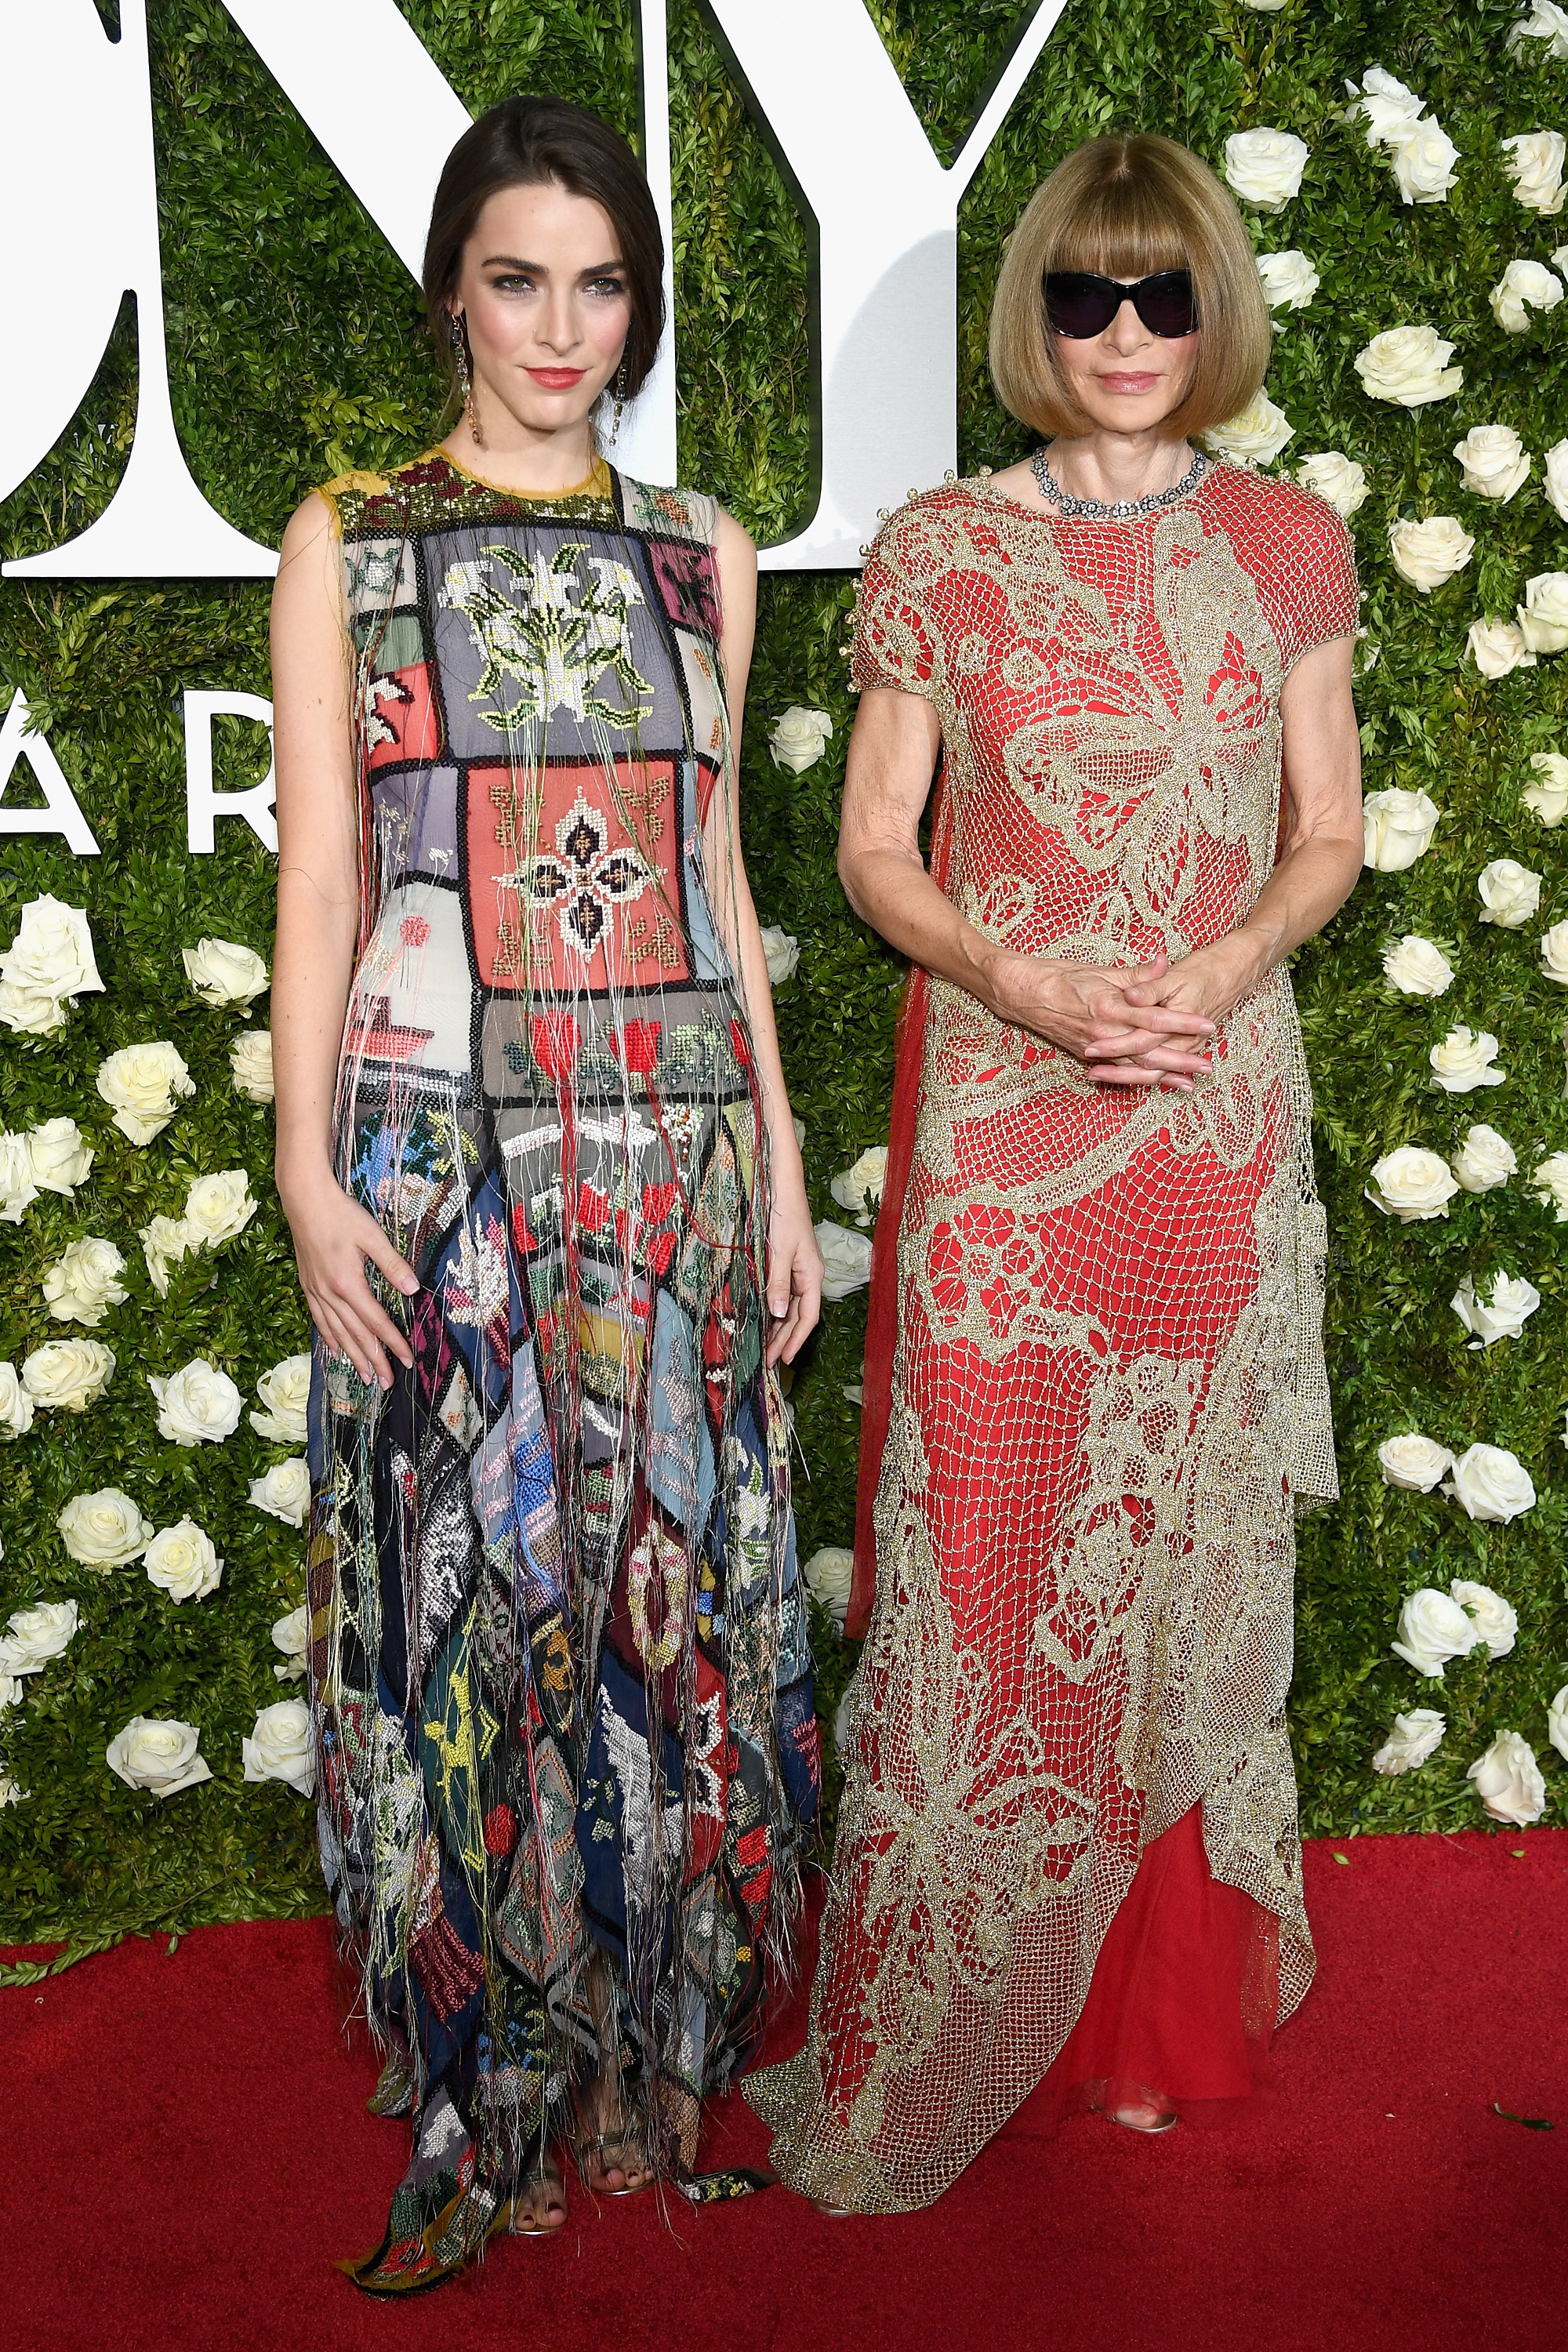 Bee Shaffer and Anna Wintour attend the Tony Awards 2017